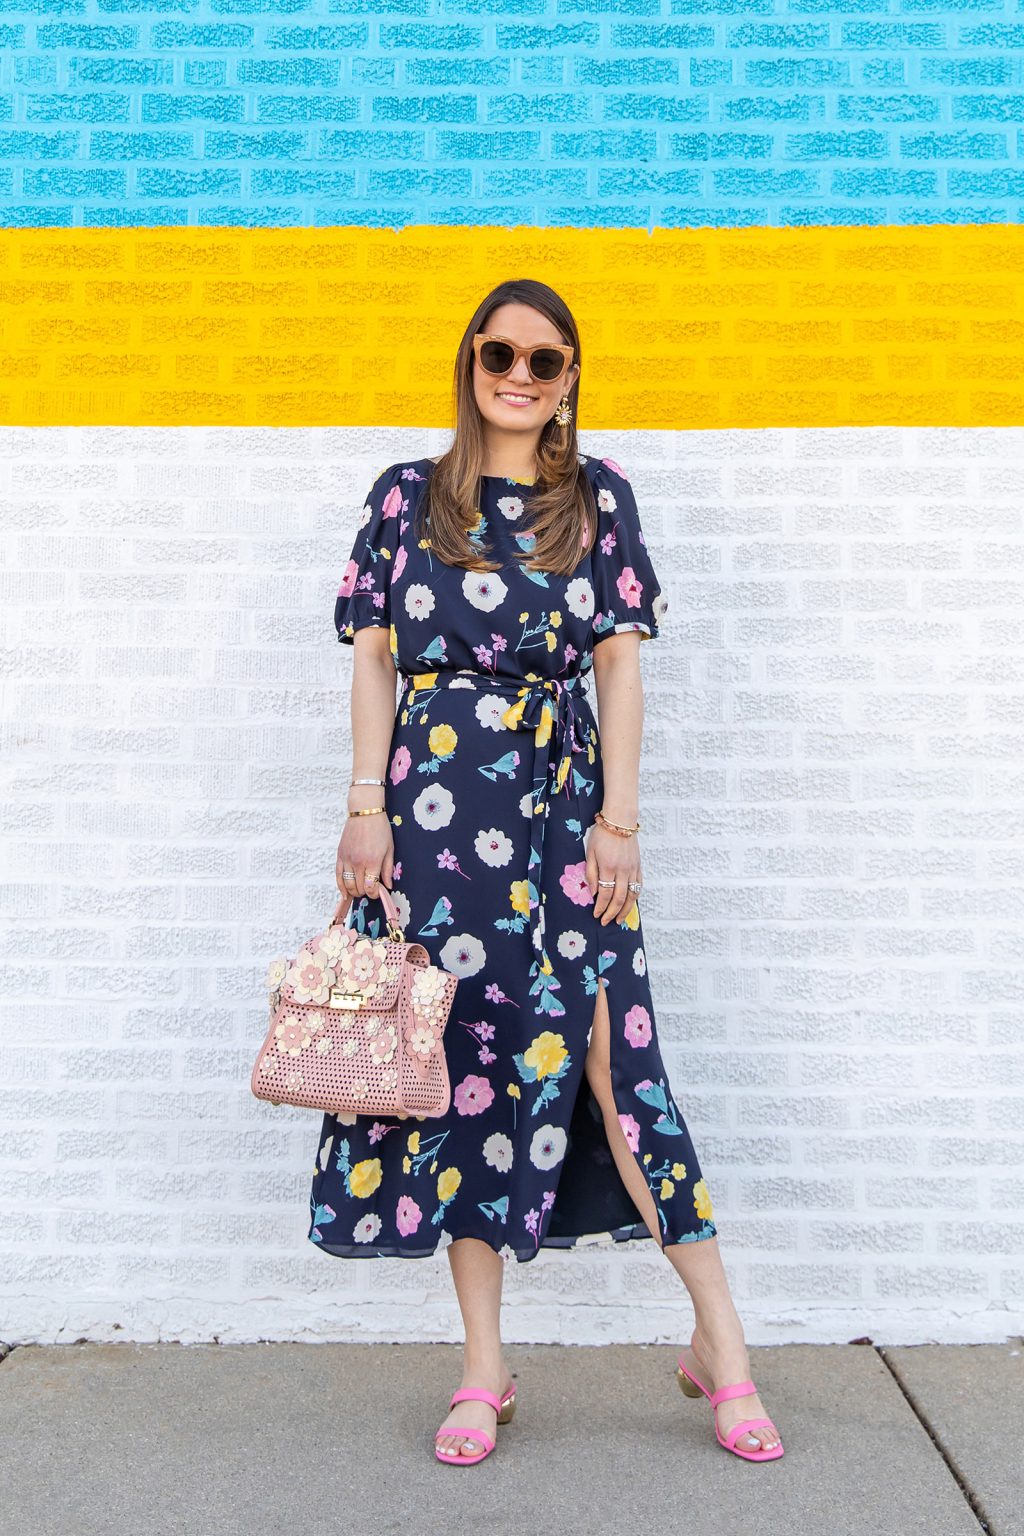 The Best Ann Taylor Spring Looks - Style Charade